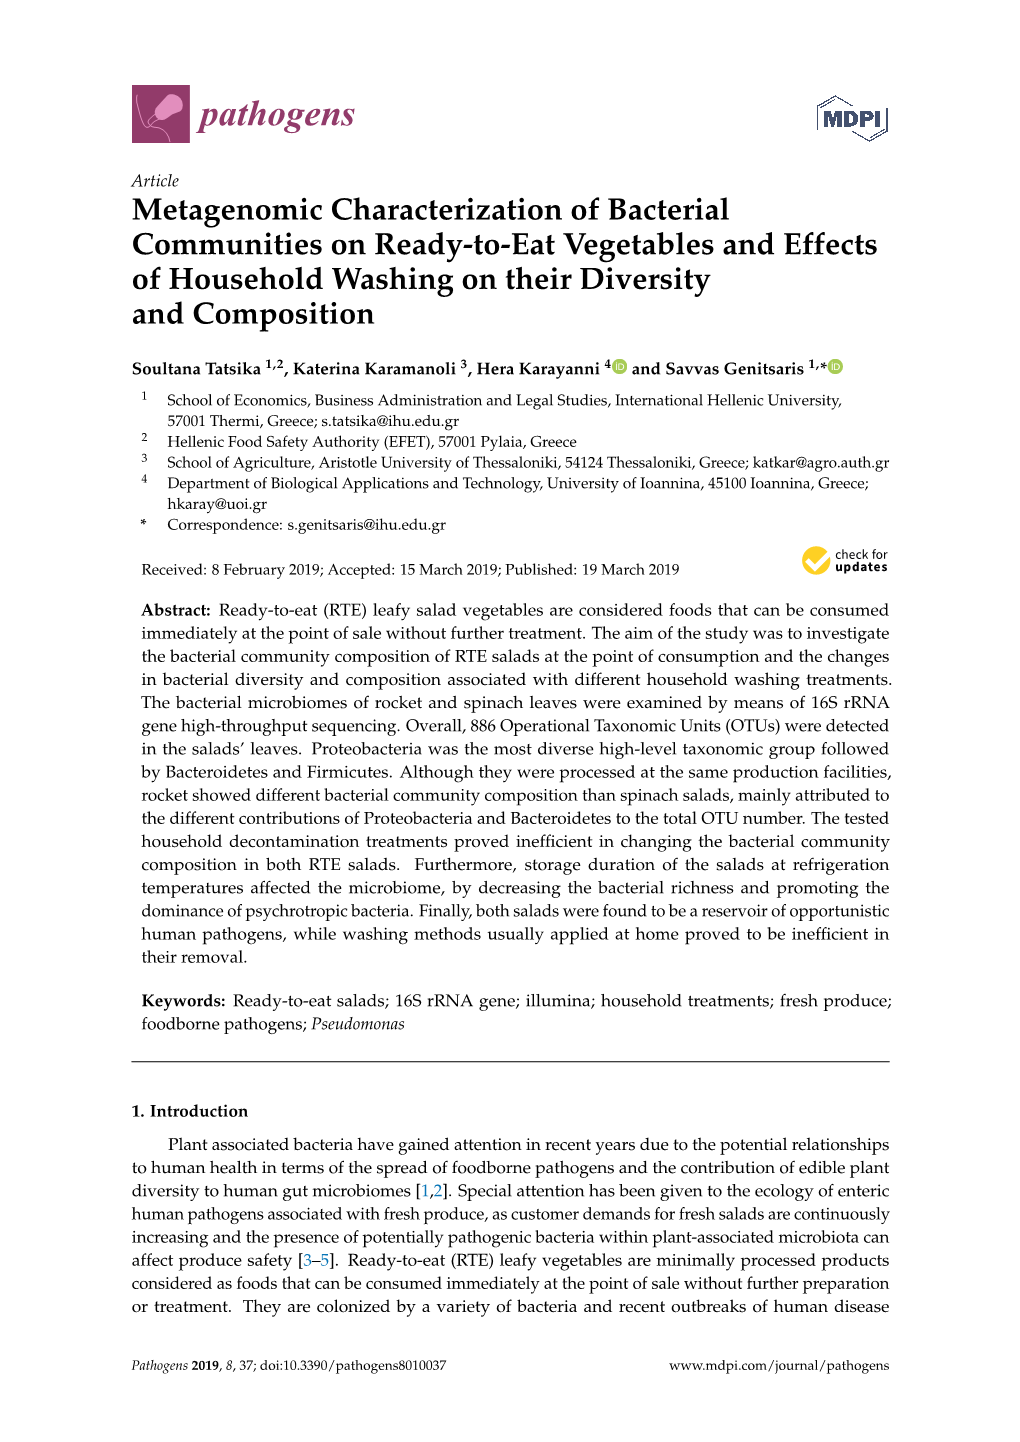 Metagenomic Characterization of Bacterial Communities on Ready-To-Eat Vegetables and Effects of Household Washing on Their Diversity and Composition